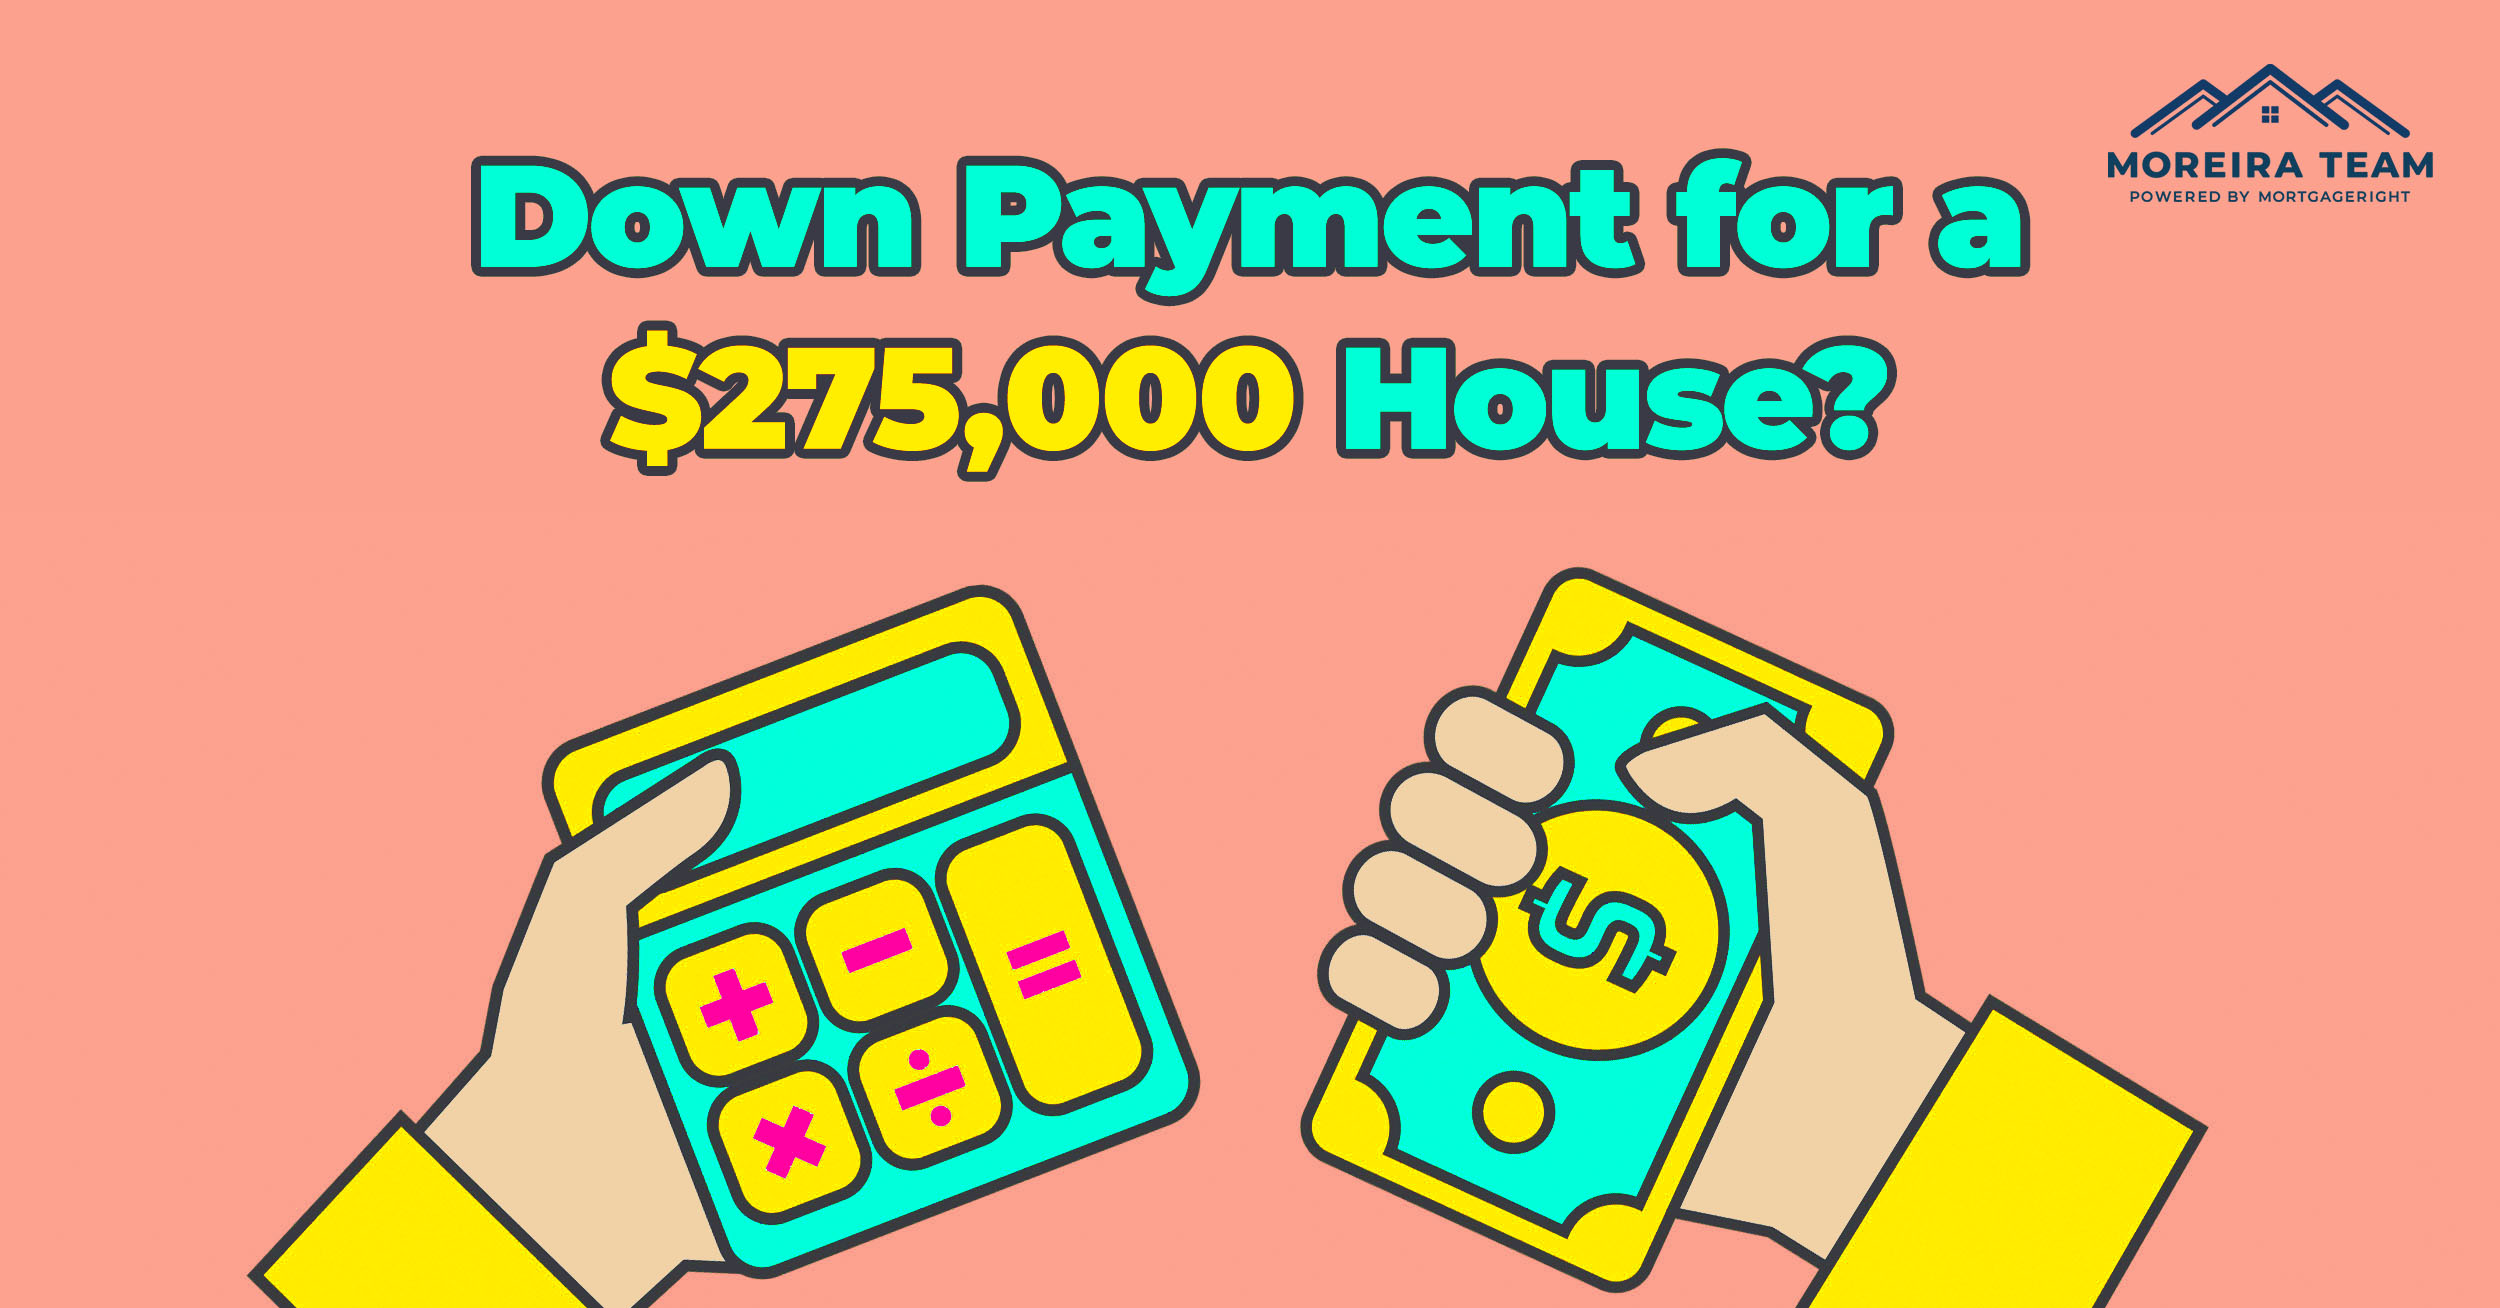 How Much is my Down Payment for a $275,000 House?